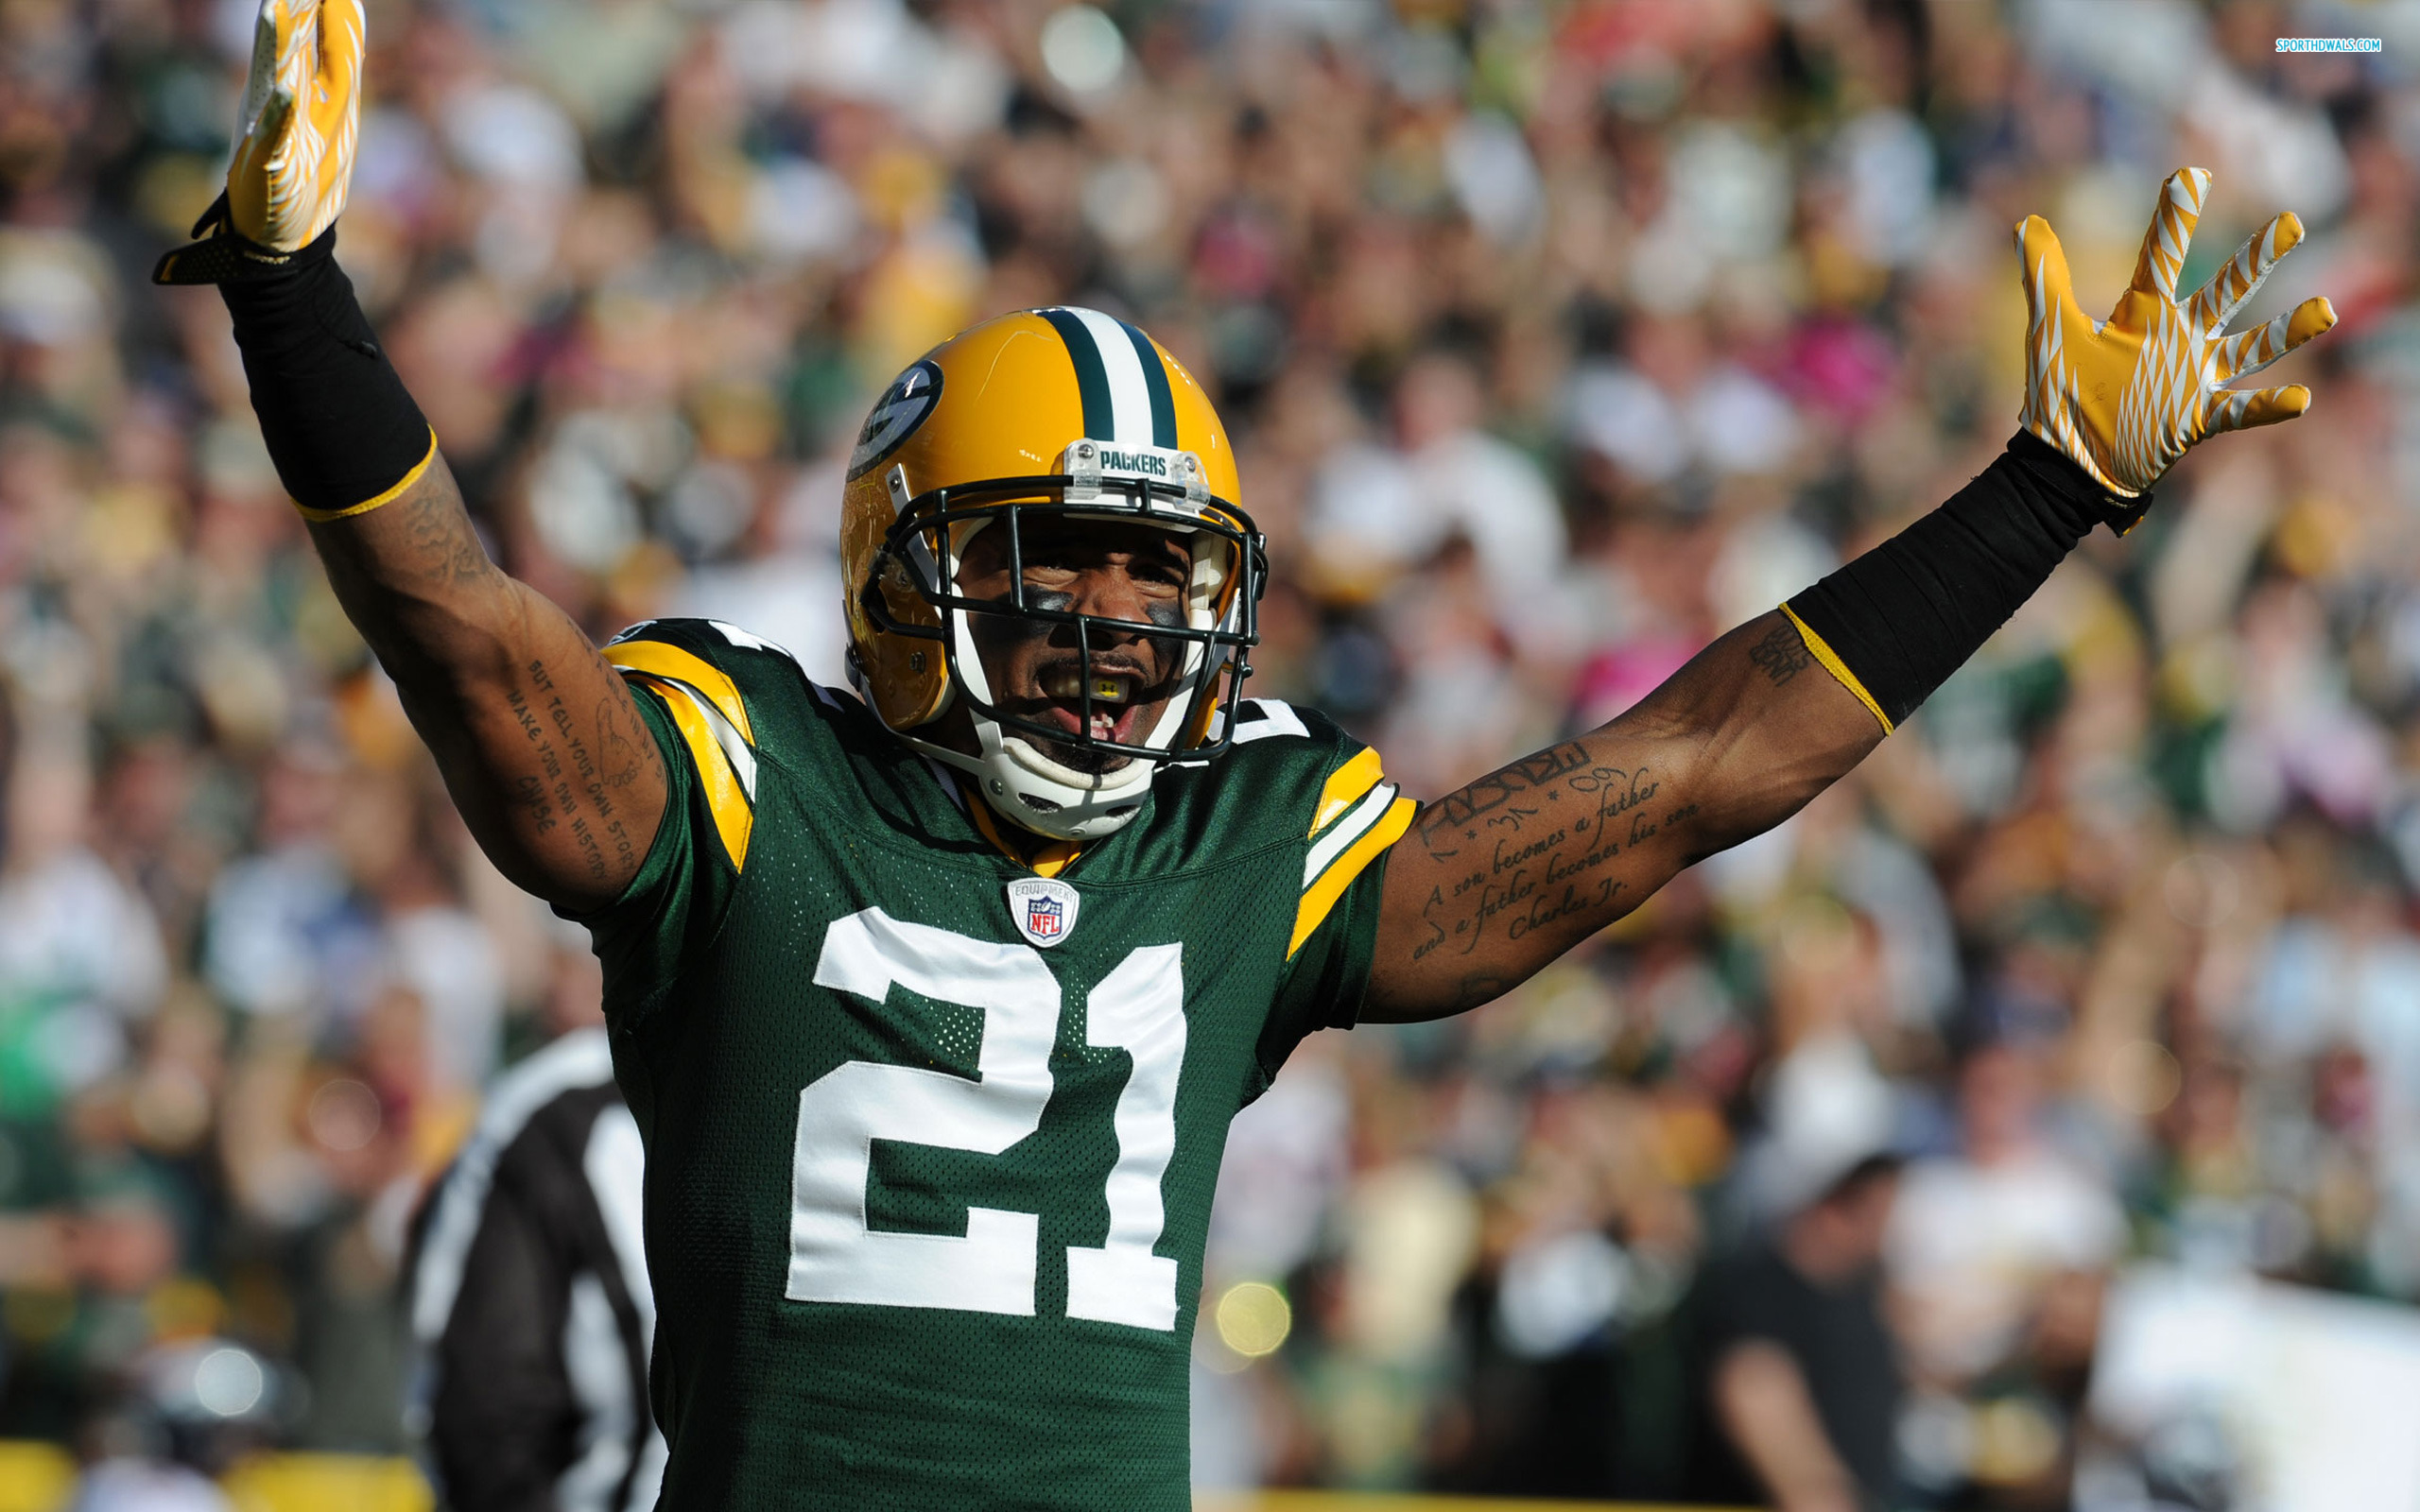 5. Charles Woodson | RealClearSports